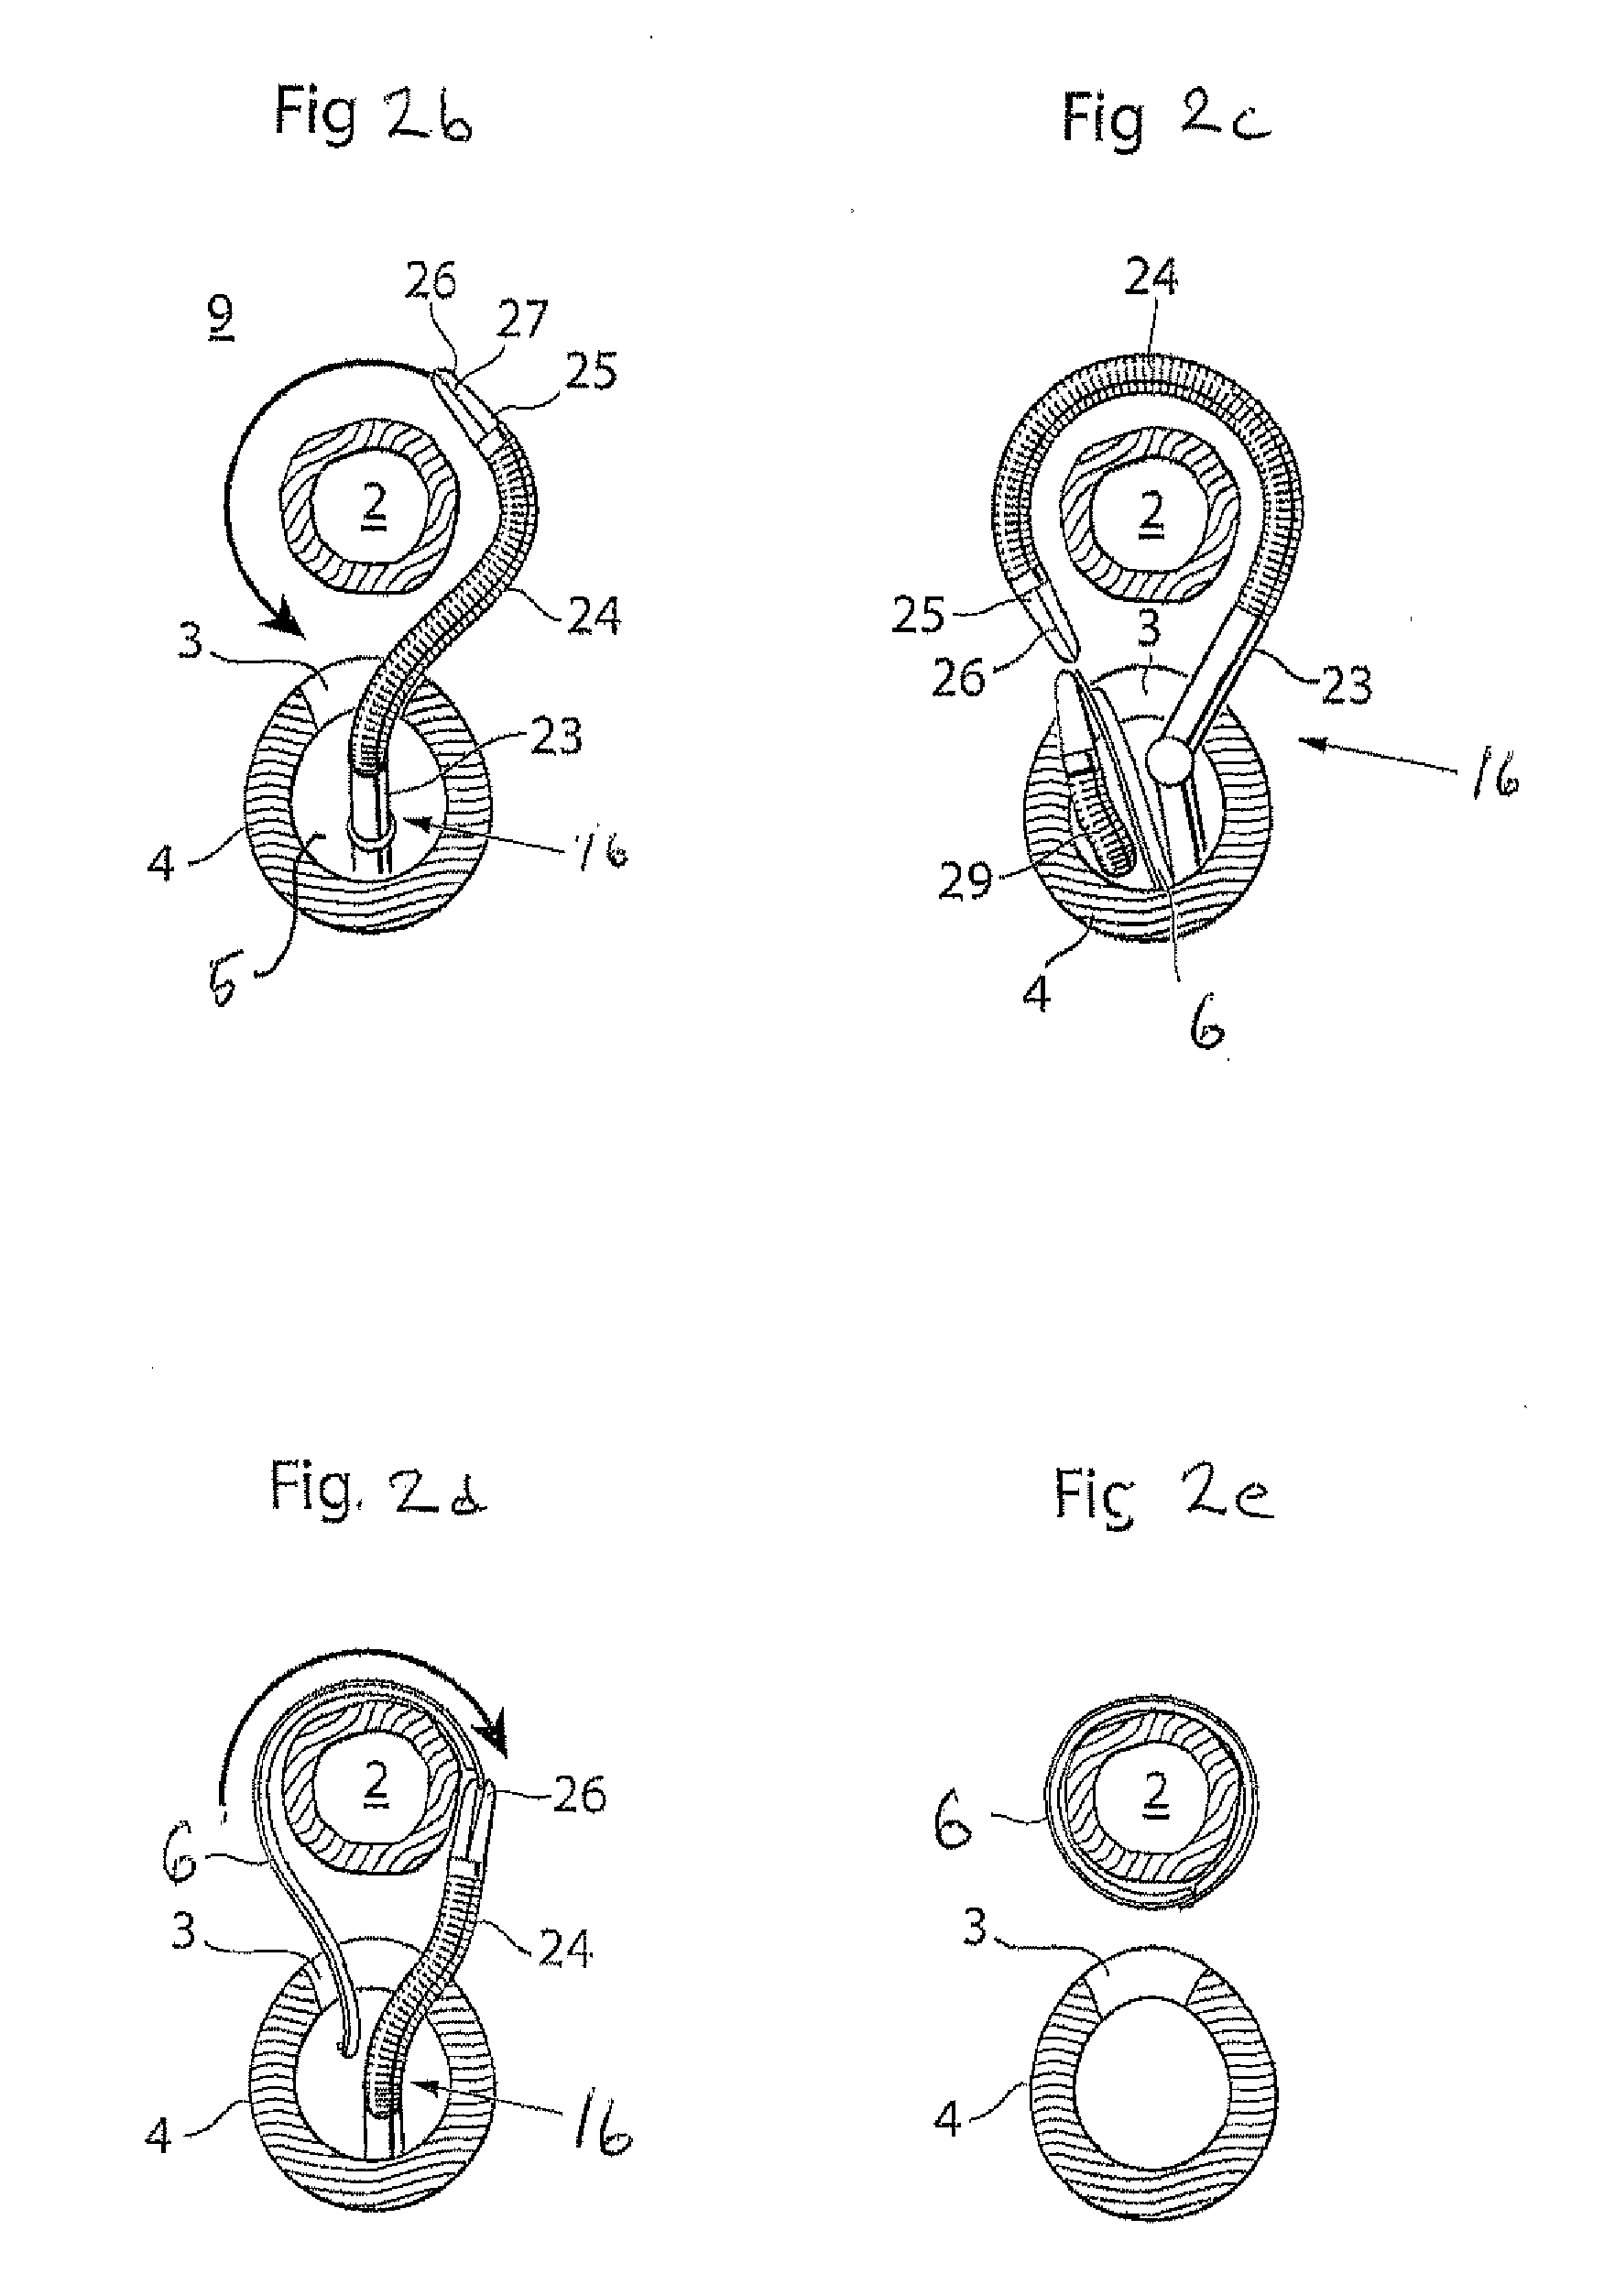 Vaginal operation method for the treatment of urinary incontinence in women